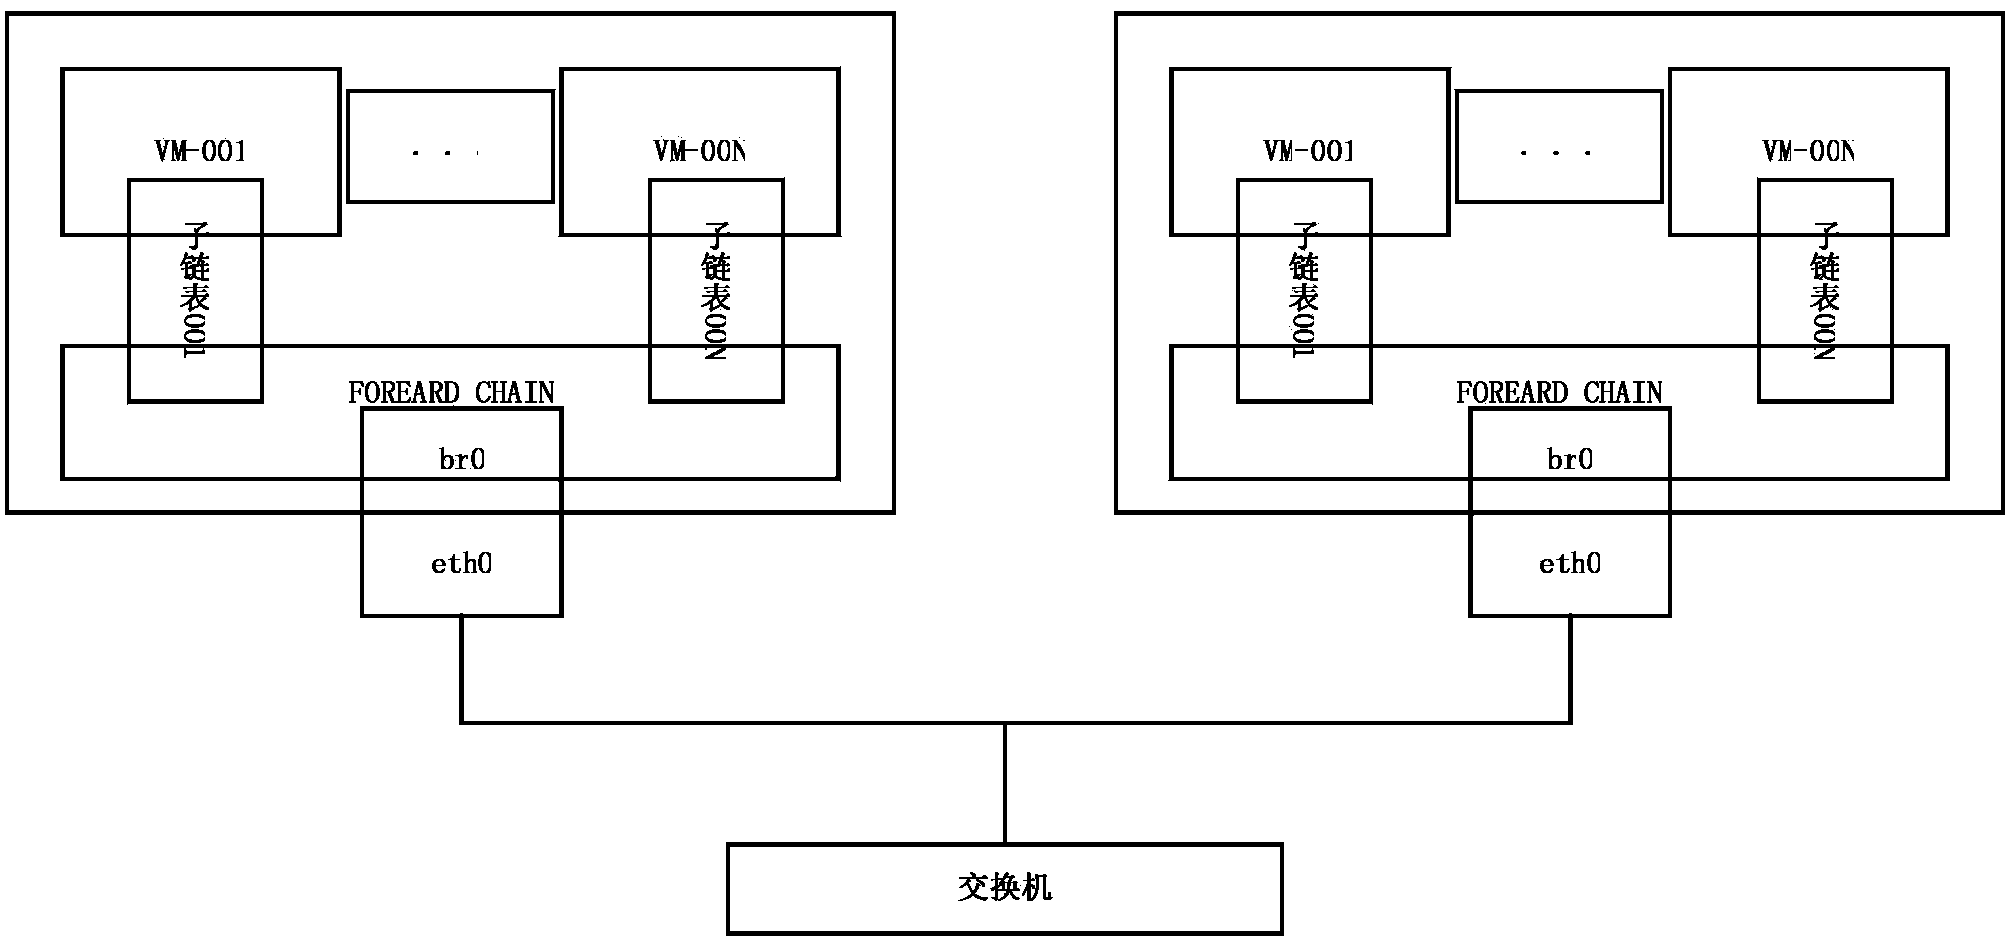 Network firewall realization method suitable for virtual machine